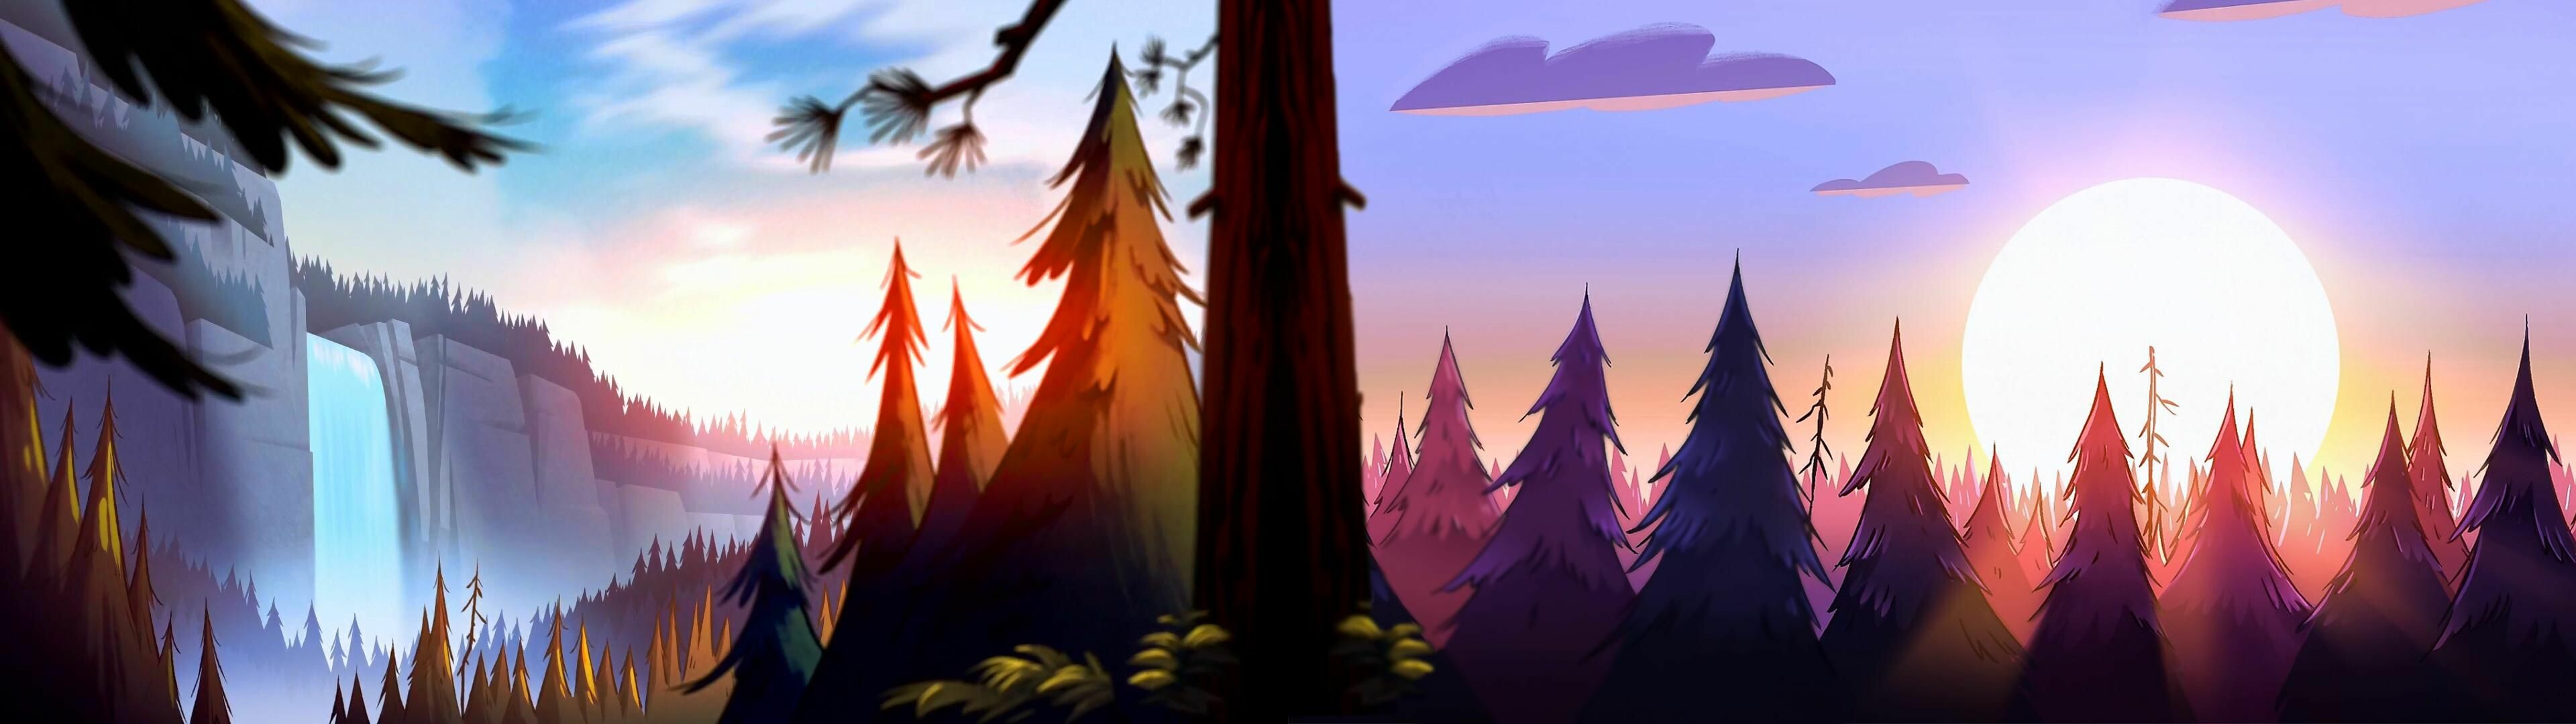 Gravity Falls: A mysterious town full of paranormal incidents and supernatural creatures. 3840x1080 Dual Screen Wallpaper.